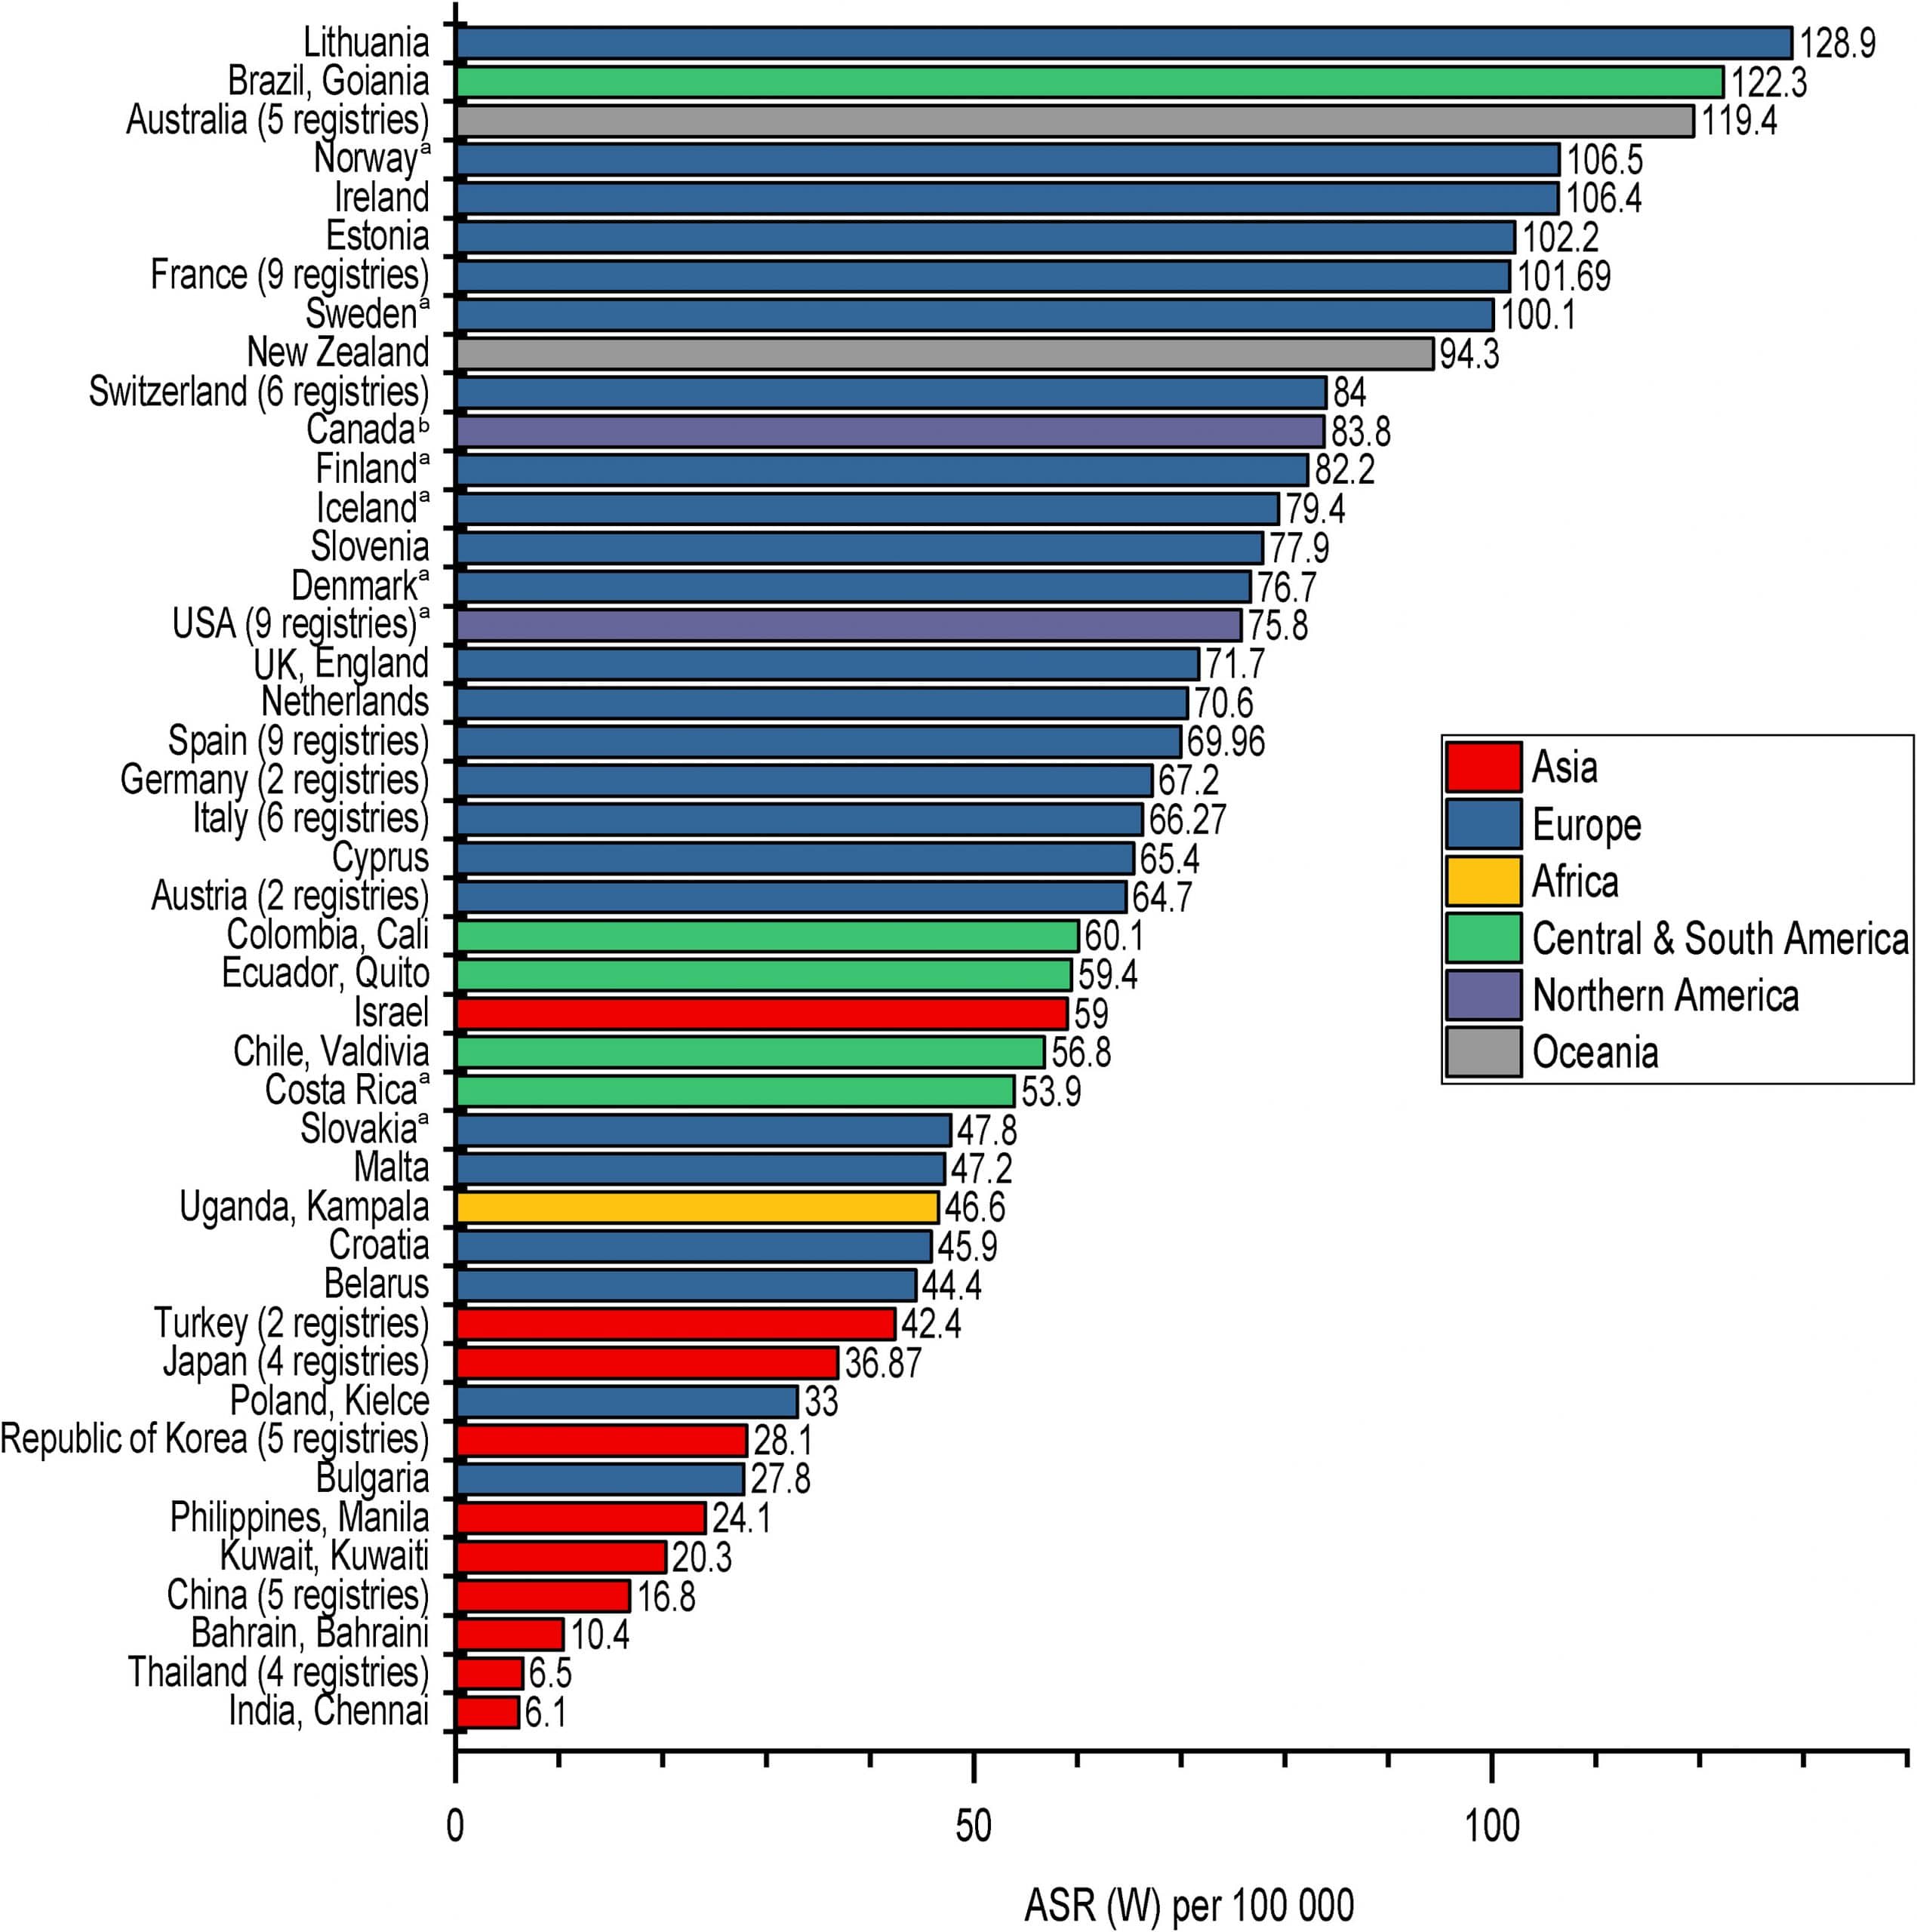 Recent Global Patterns in Prostate Cancer Incidence and Mortality Rates ...